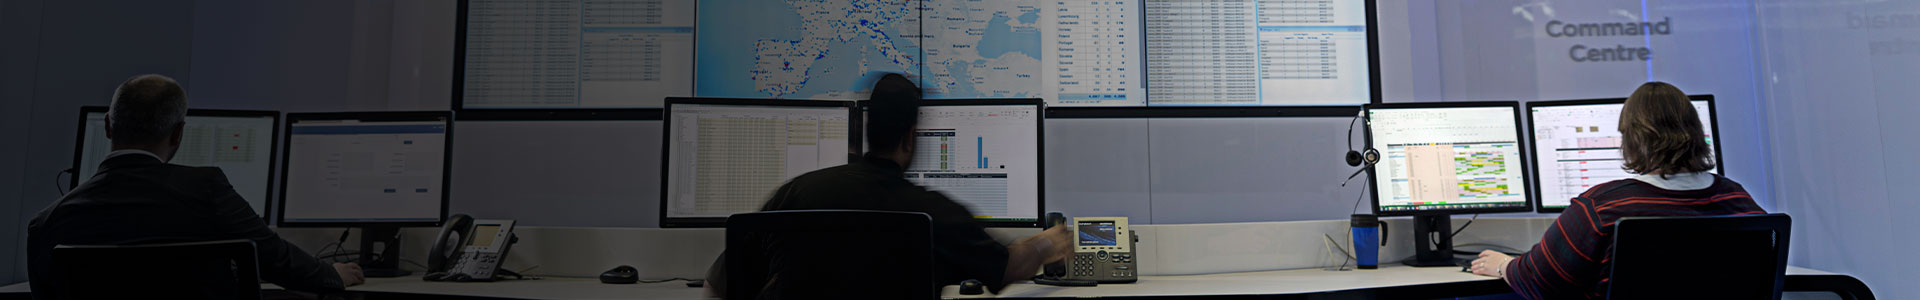 Image of crisis response center using data to inform decisions.